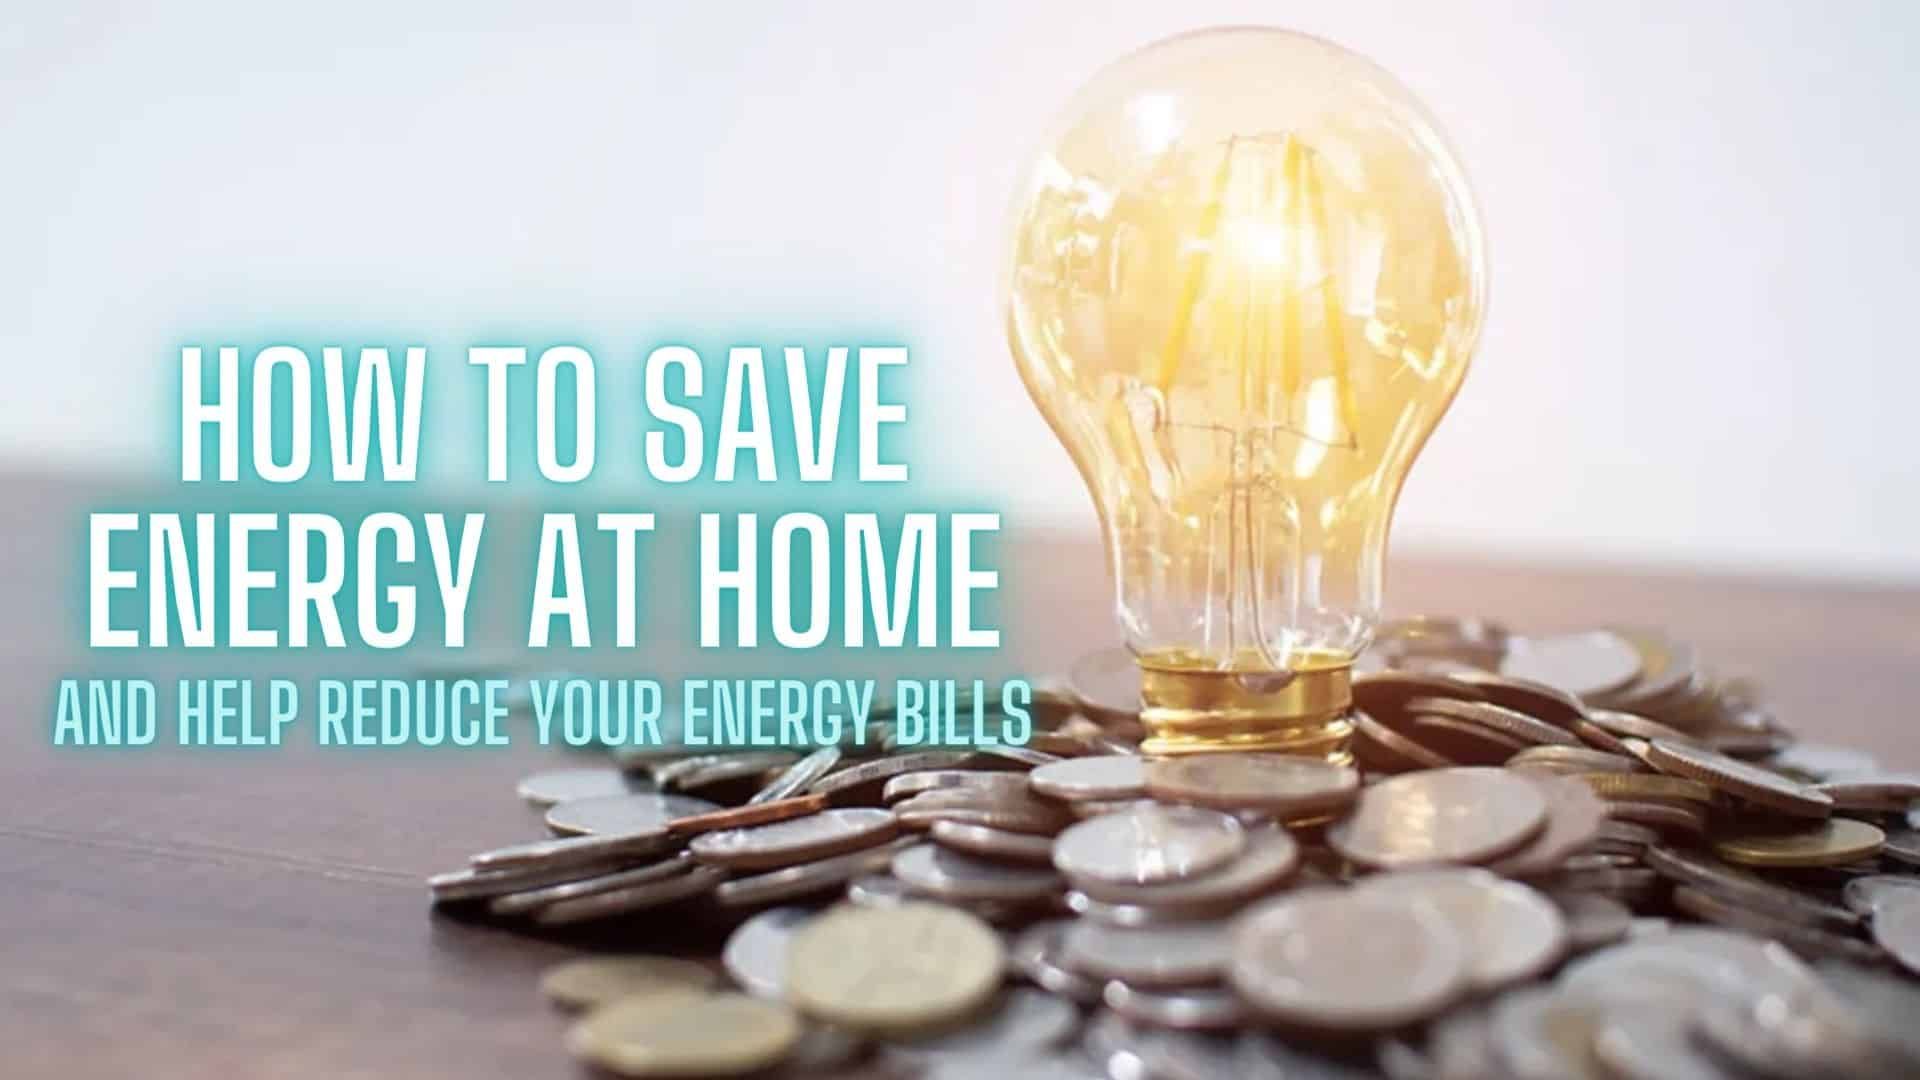 How To Save Energy At Home And Help Reduce Your Energy Bills